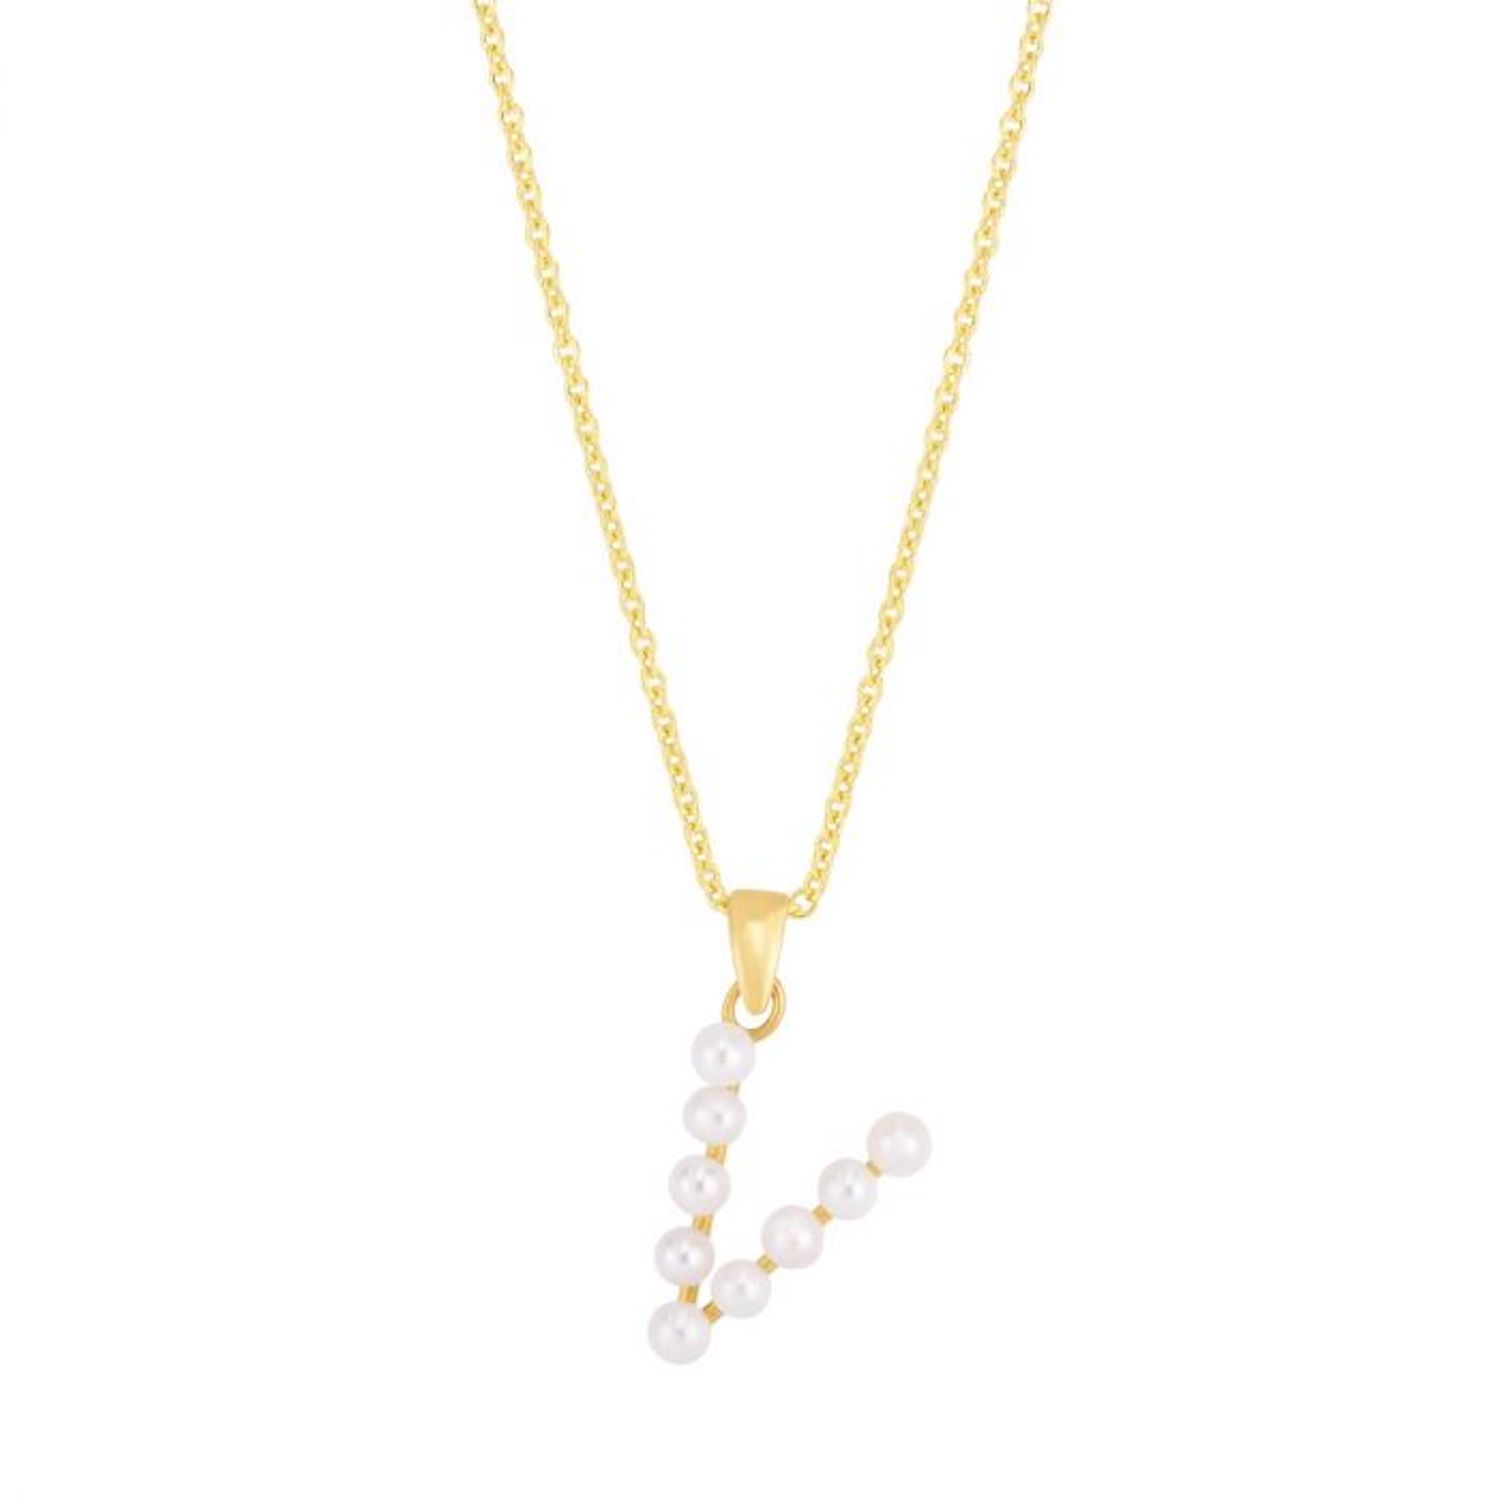 14K Yellow Gold Cultured Pearl Initials Letter Pendant Necklace 18" - V